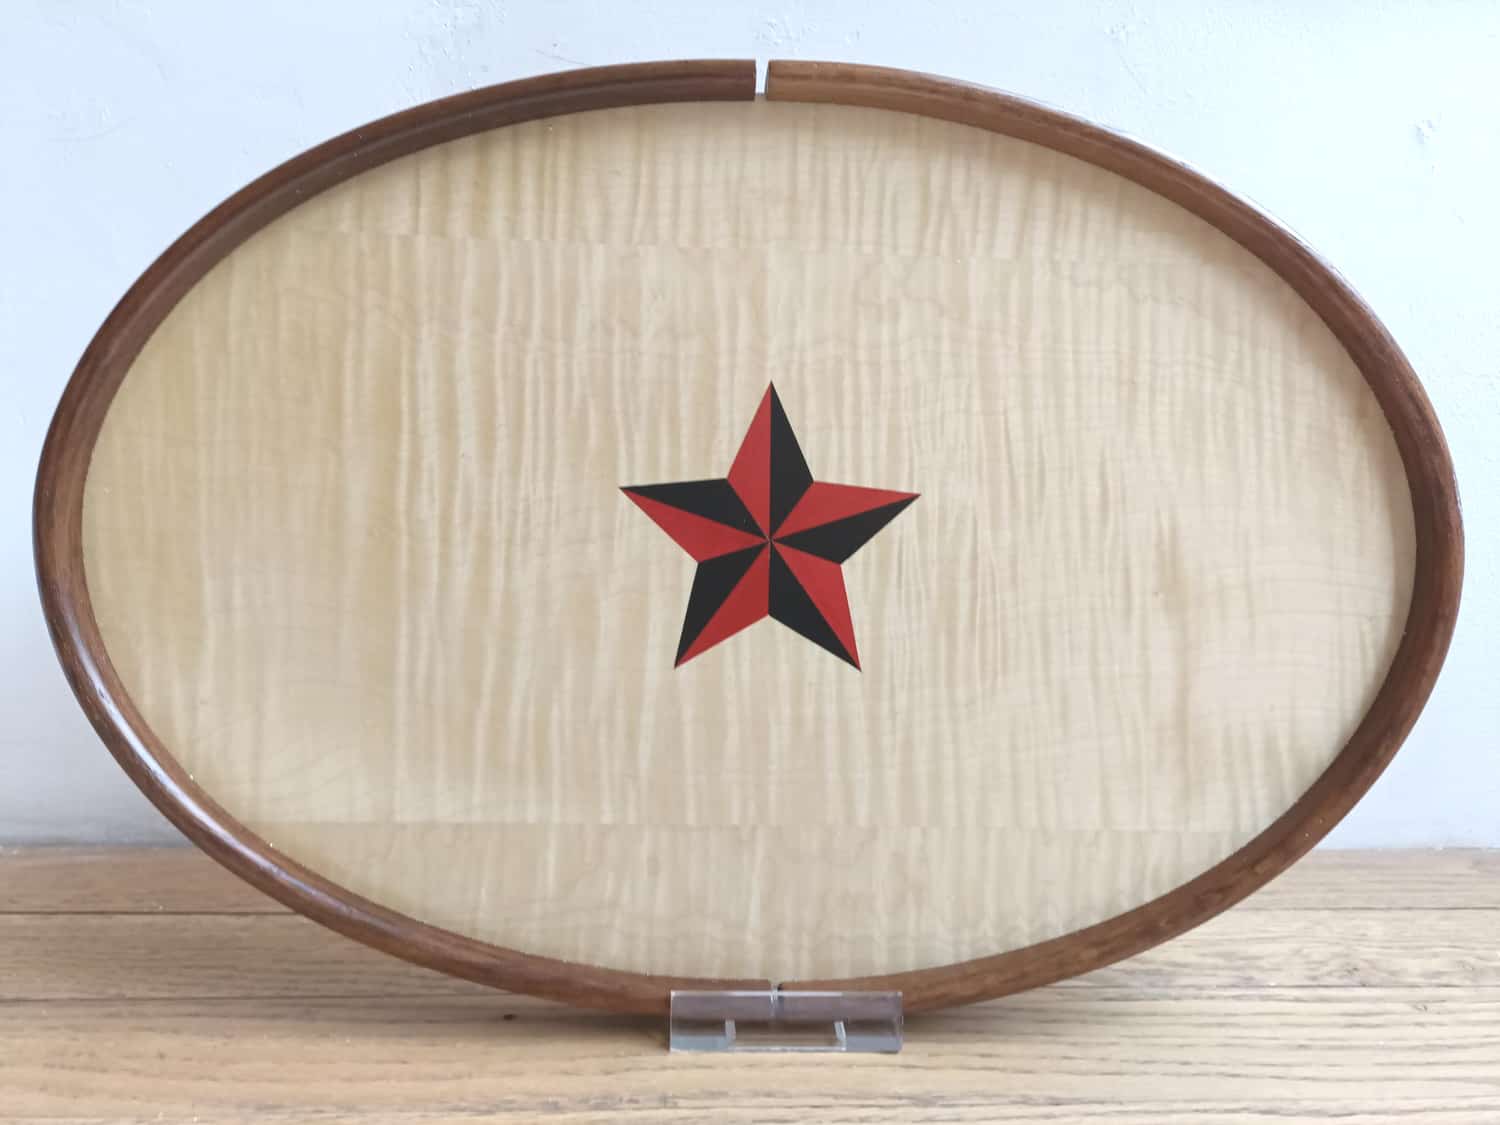 SALE Red Star Tray Toby Winteringham